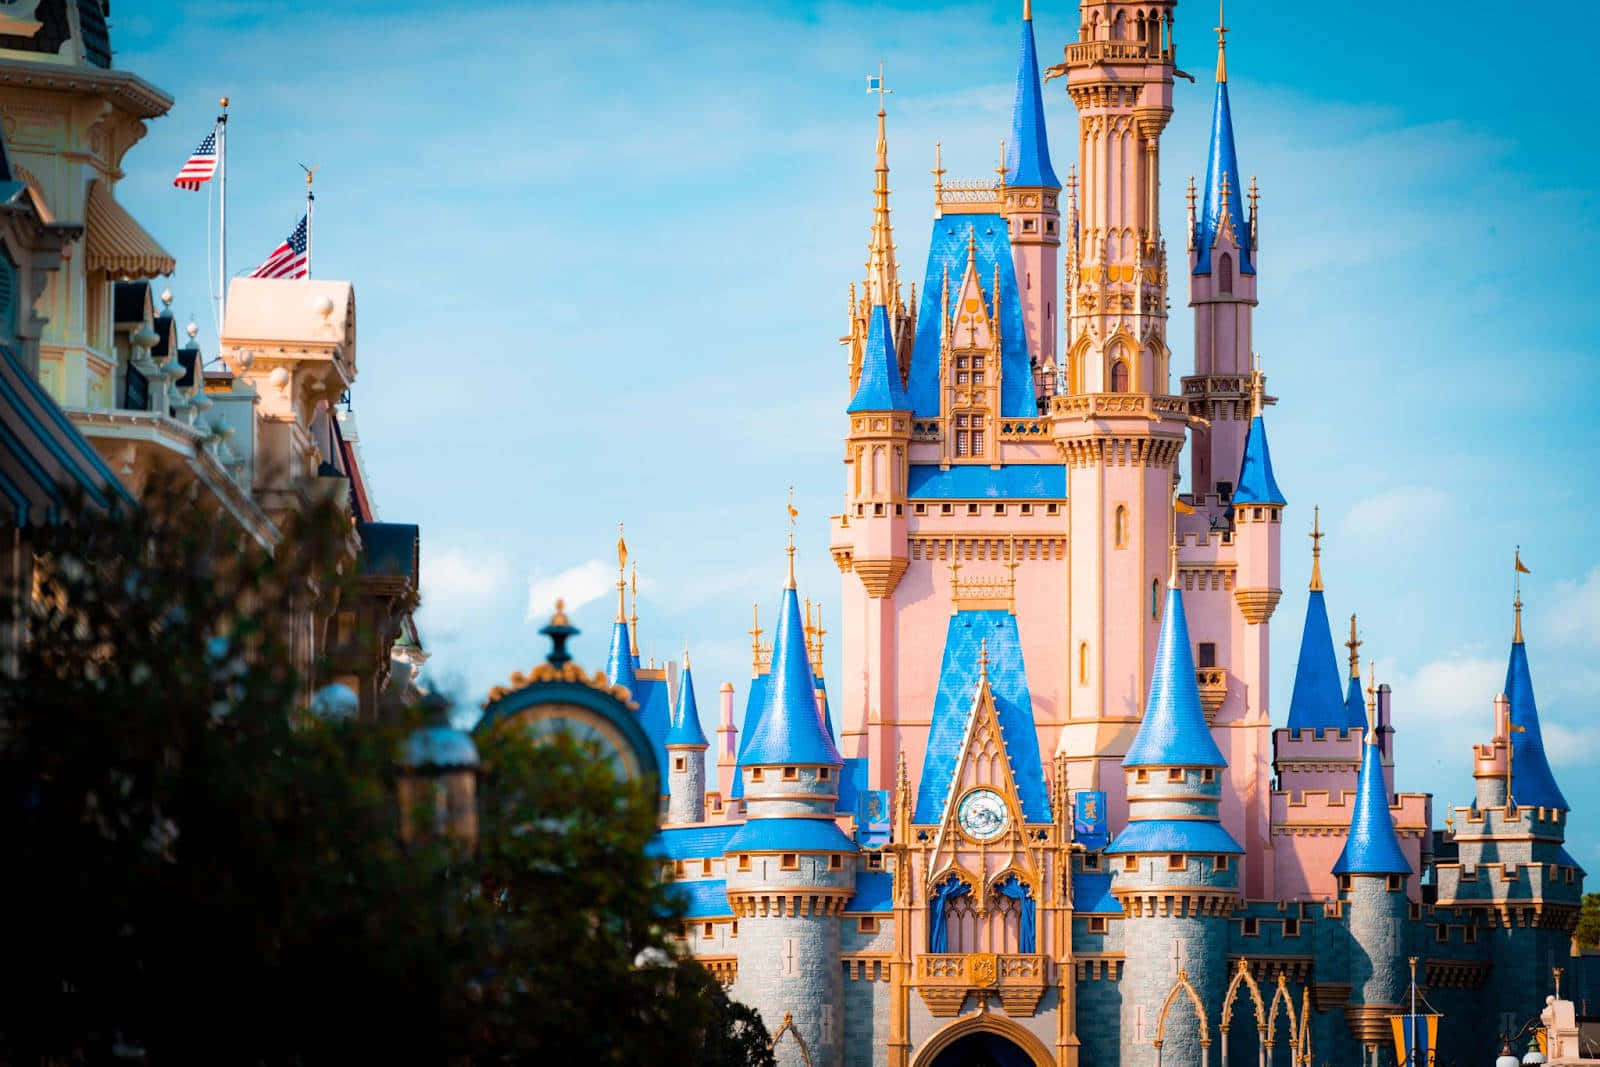 Step Inside the Magic of the Disney Castle